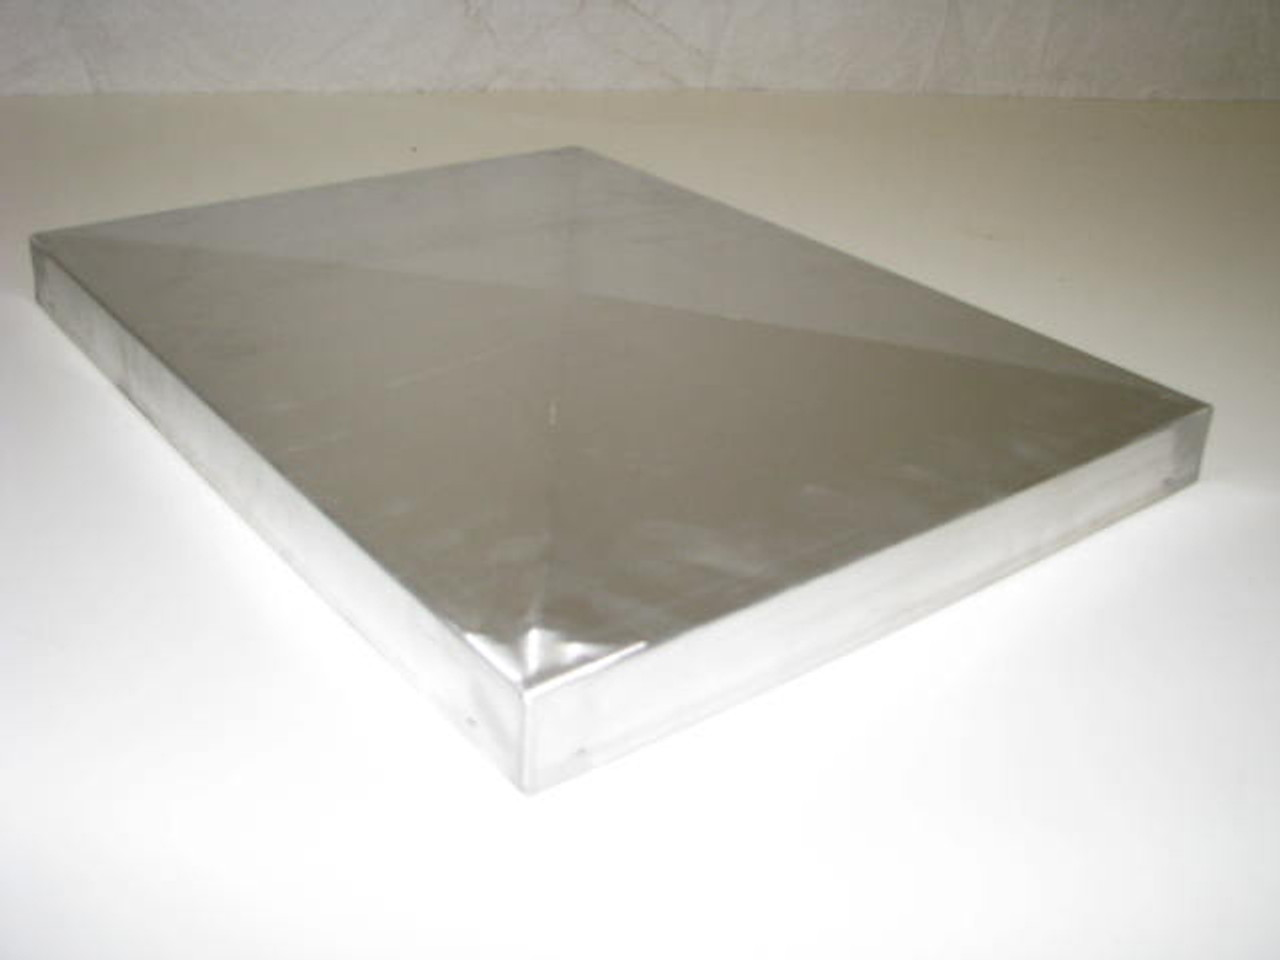 Spartan Aluminum Vent Cover - 12" x 16" (CBP010) ANGLED VIEW